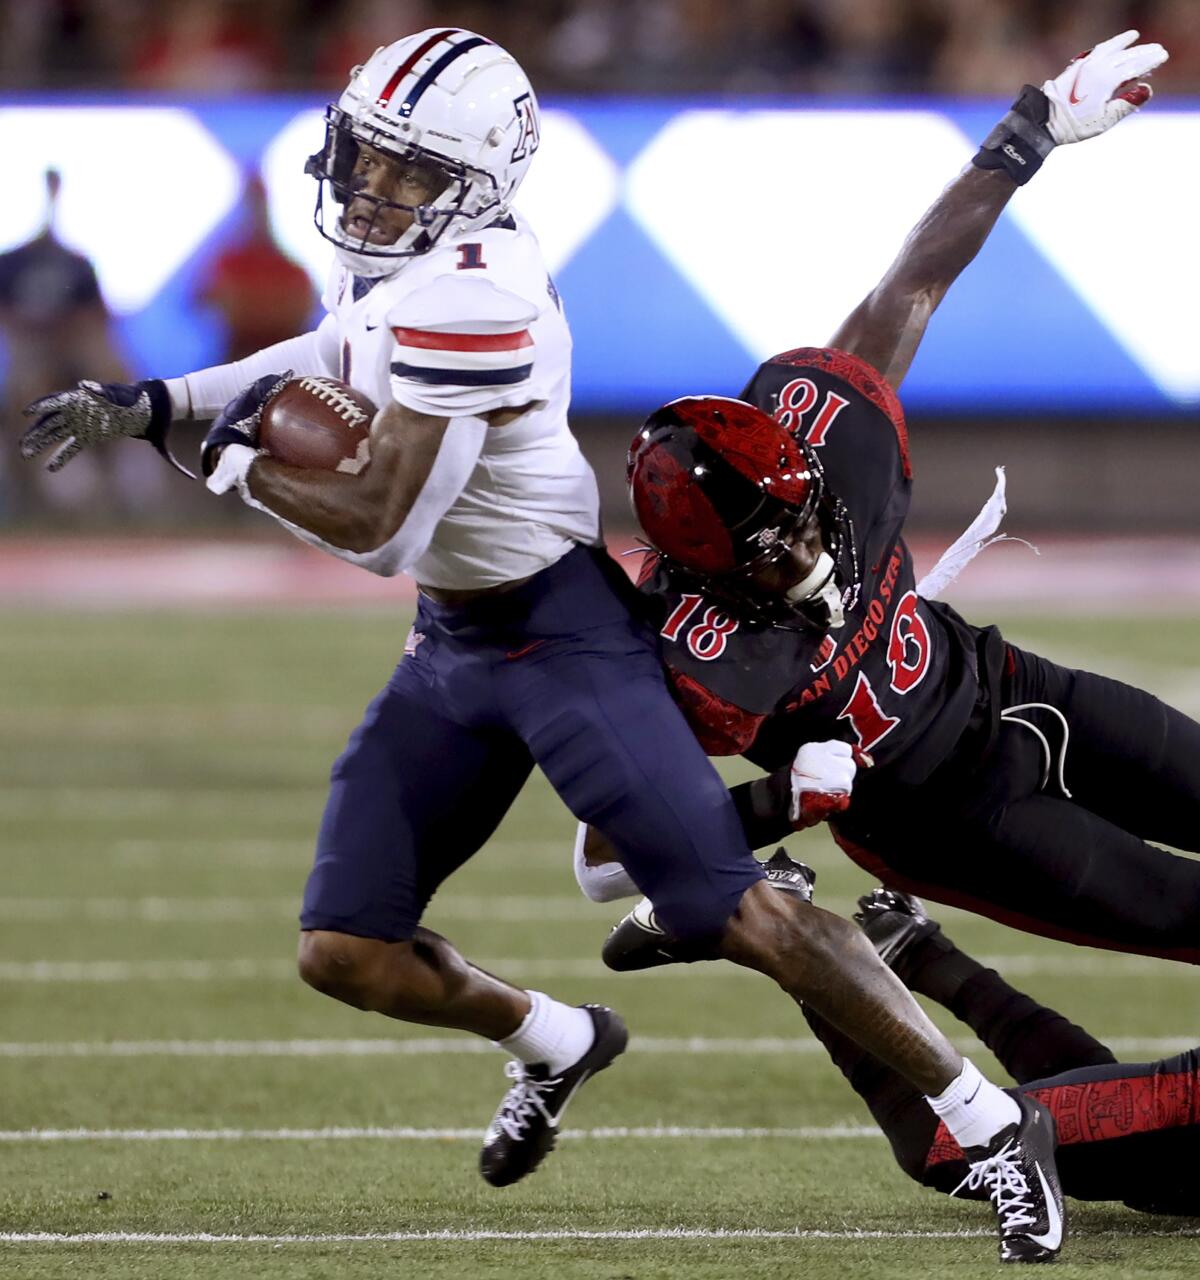 Arizona receiver Stanley Berryhill III bounces off San Diego State safety Trenton Thompson (18) after his catch and heads for the end zone for a touchdown during the first half of an NCAA college football game Saturday, Sept. 11, 2021, in Tucson, Ariz. (Kelly Presnell/Arizona Daily Star via AP)